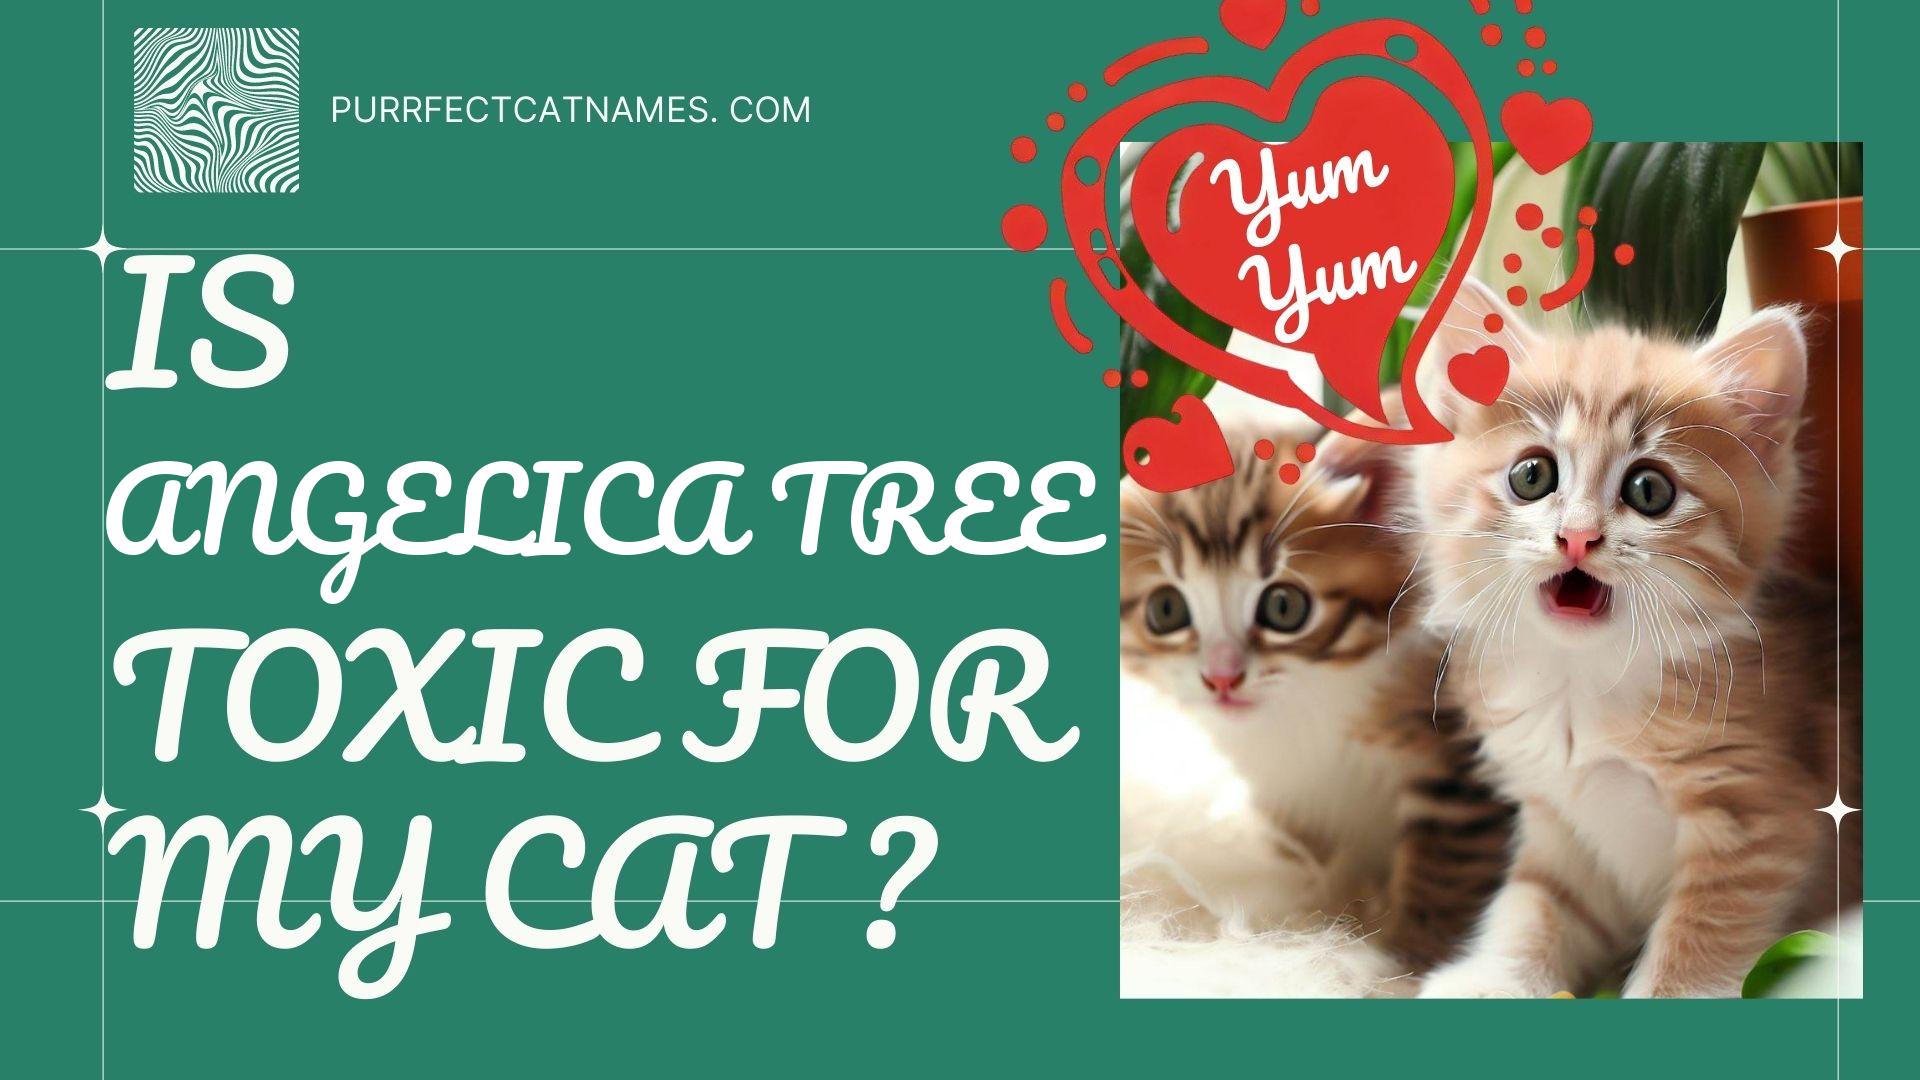 IsAngelica Tree plant toxic for your cat